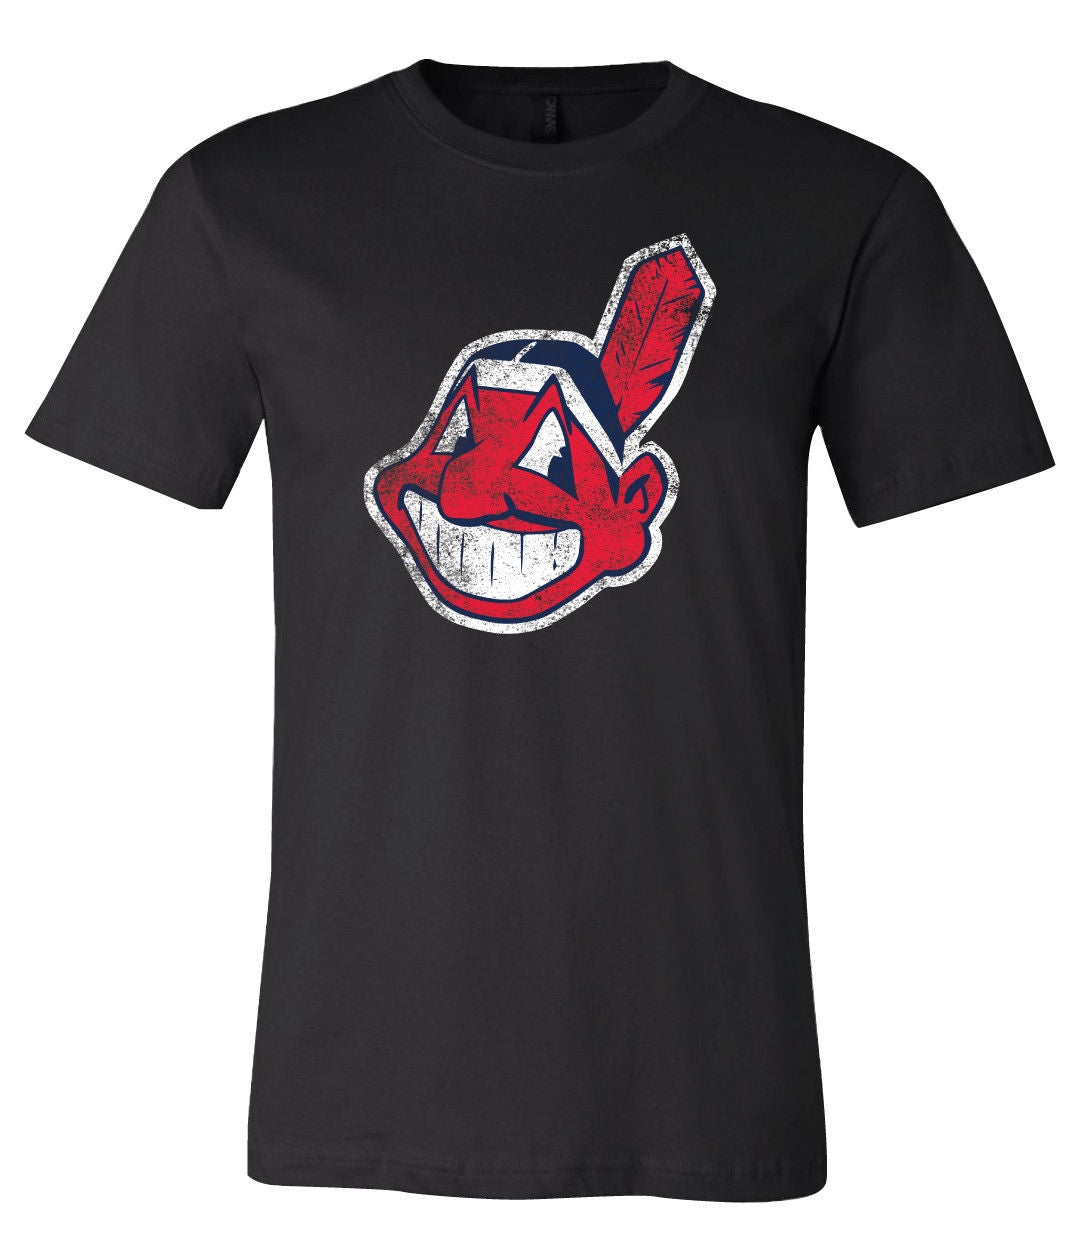 cleveland indians chief wahoo mascot